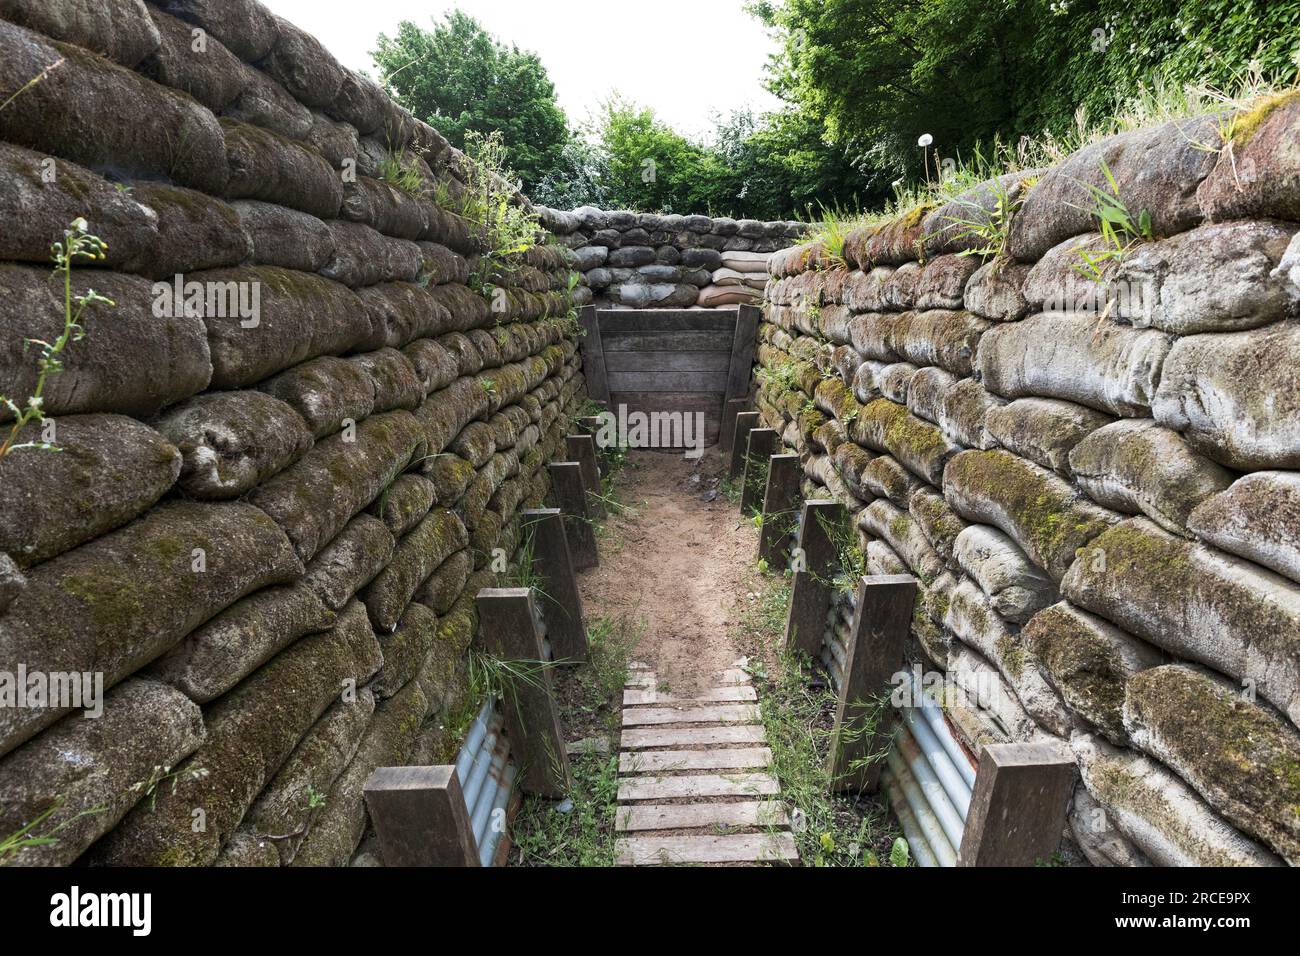 First World War Trenches, known as the Yorkshire Trenches, Ypres, Belgium, EU Stock Photo